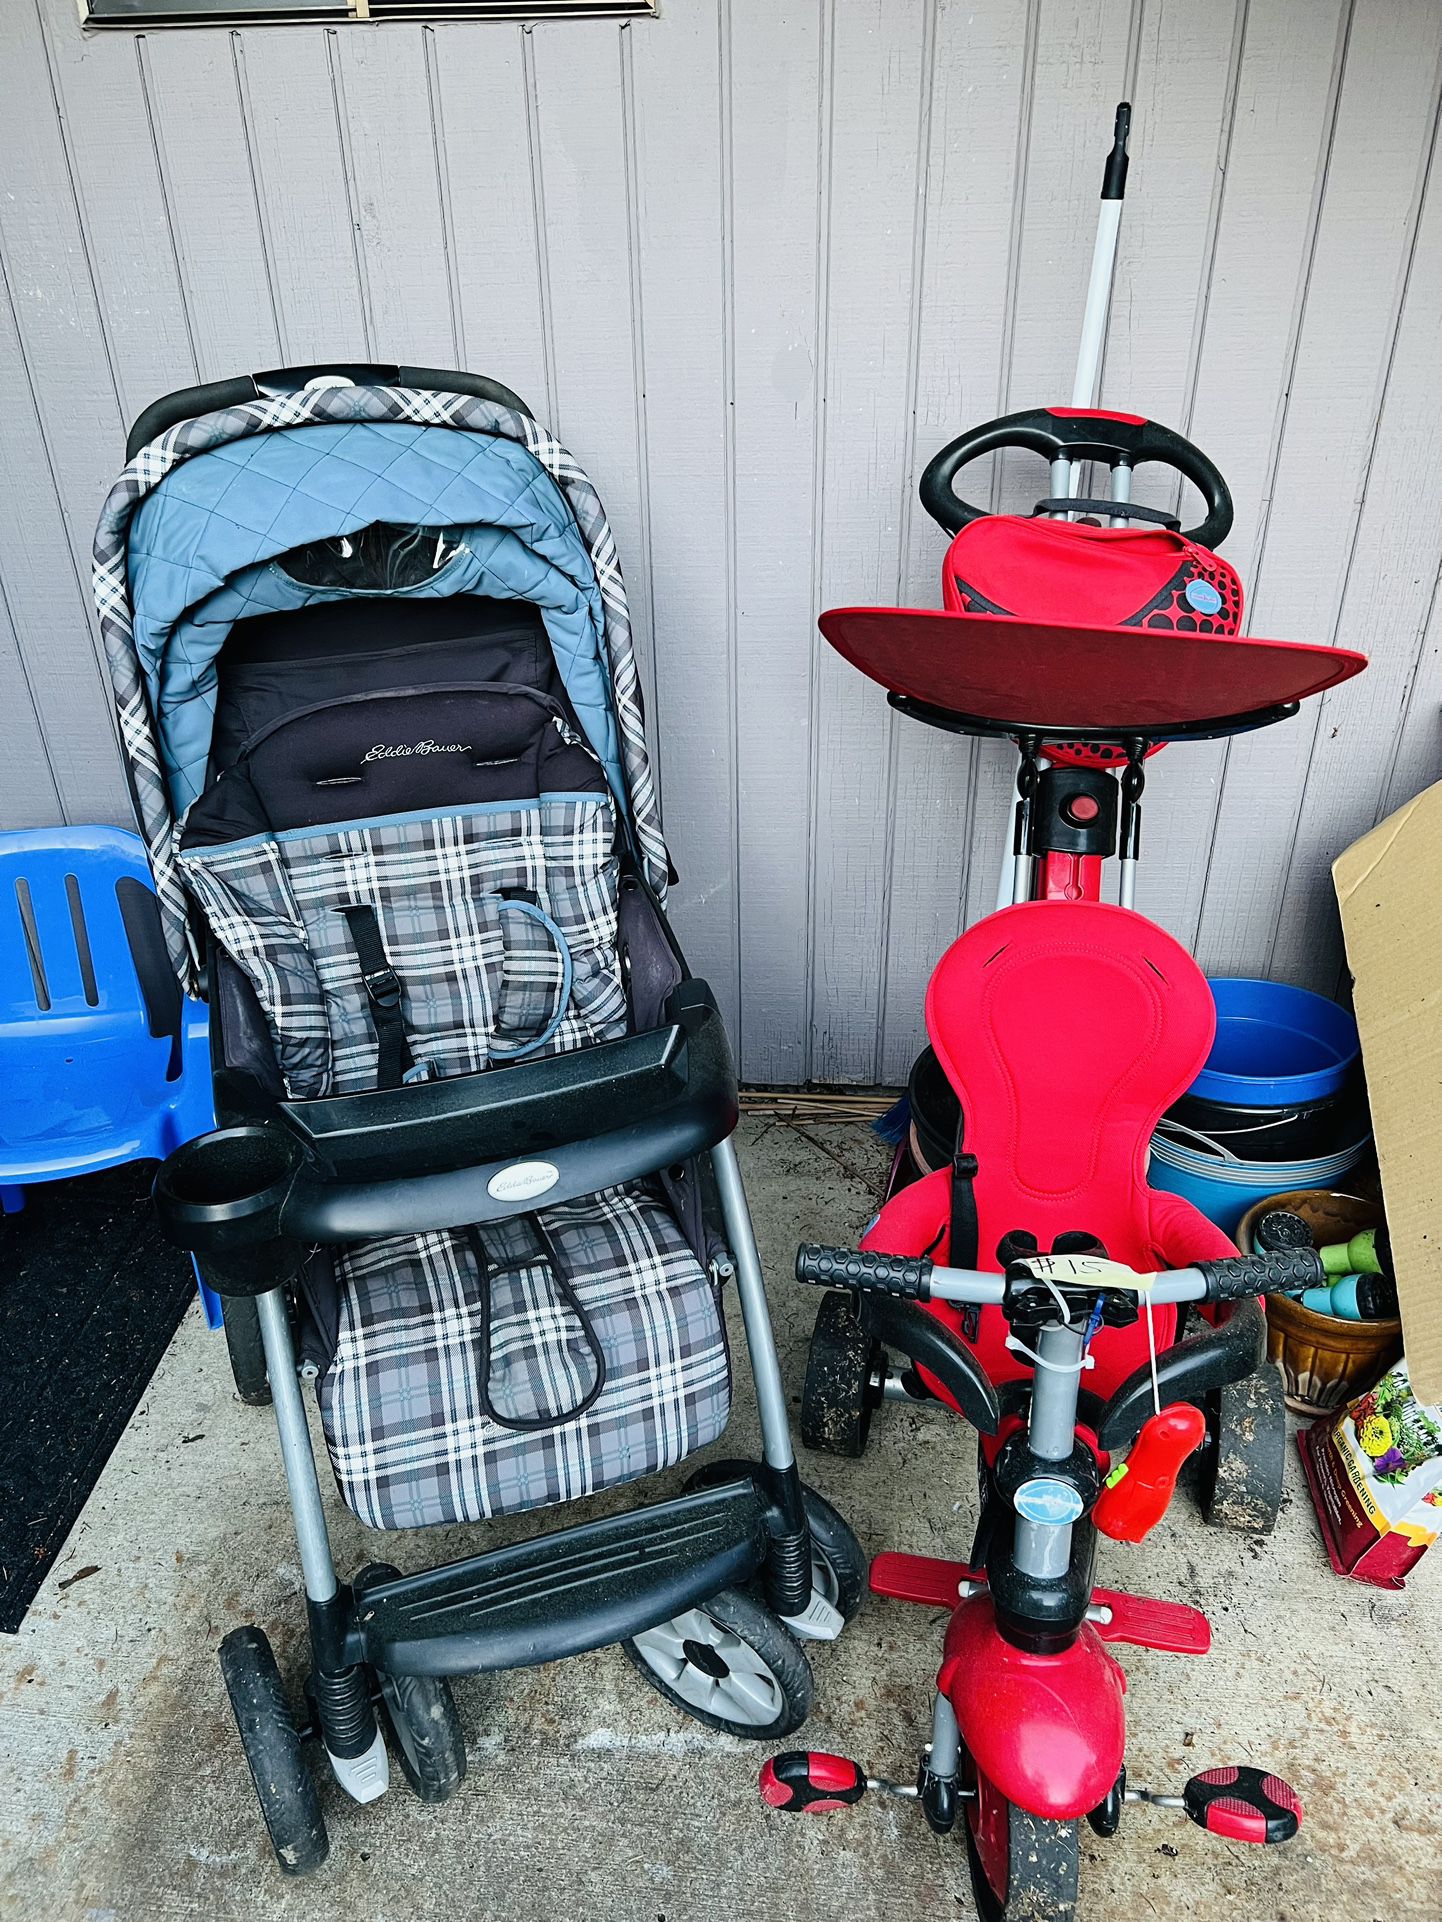 Eddie Bauer Stroller And Tricycle